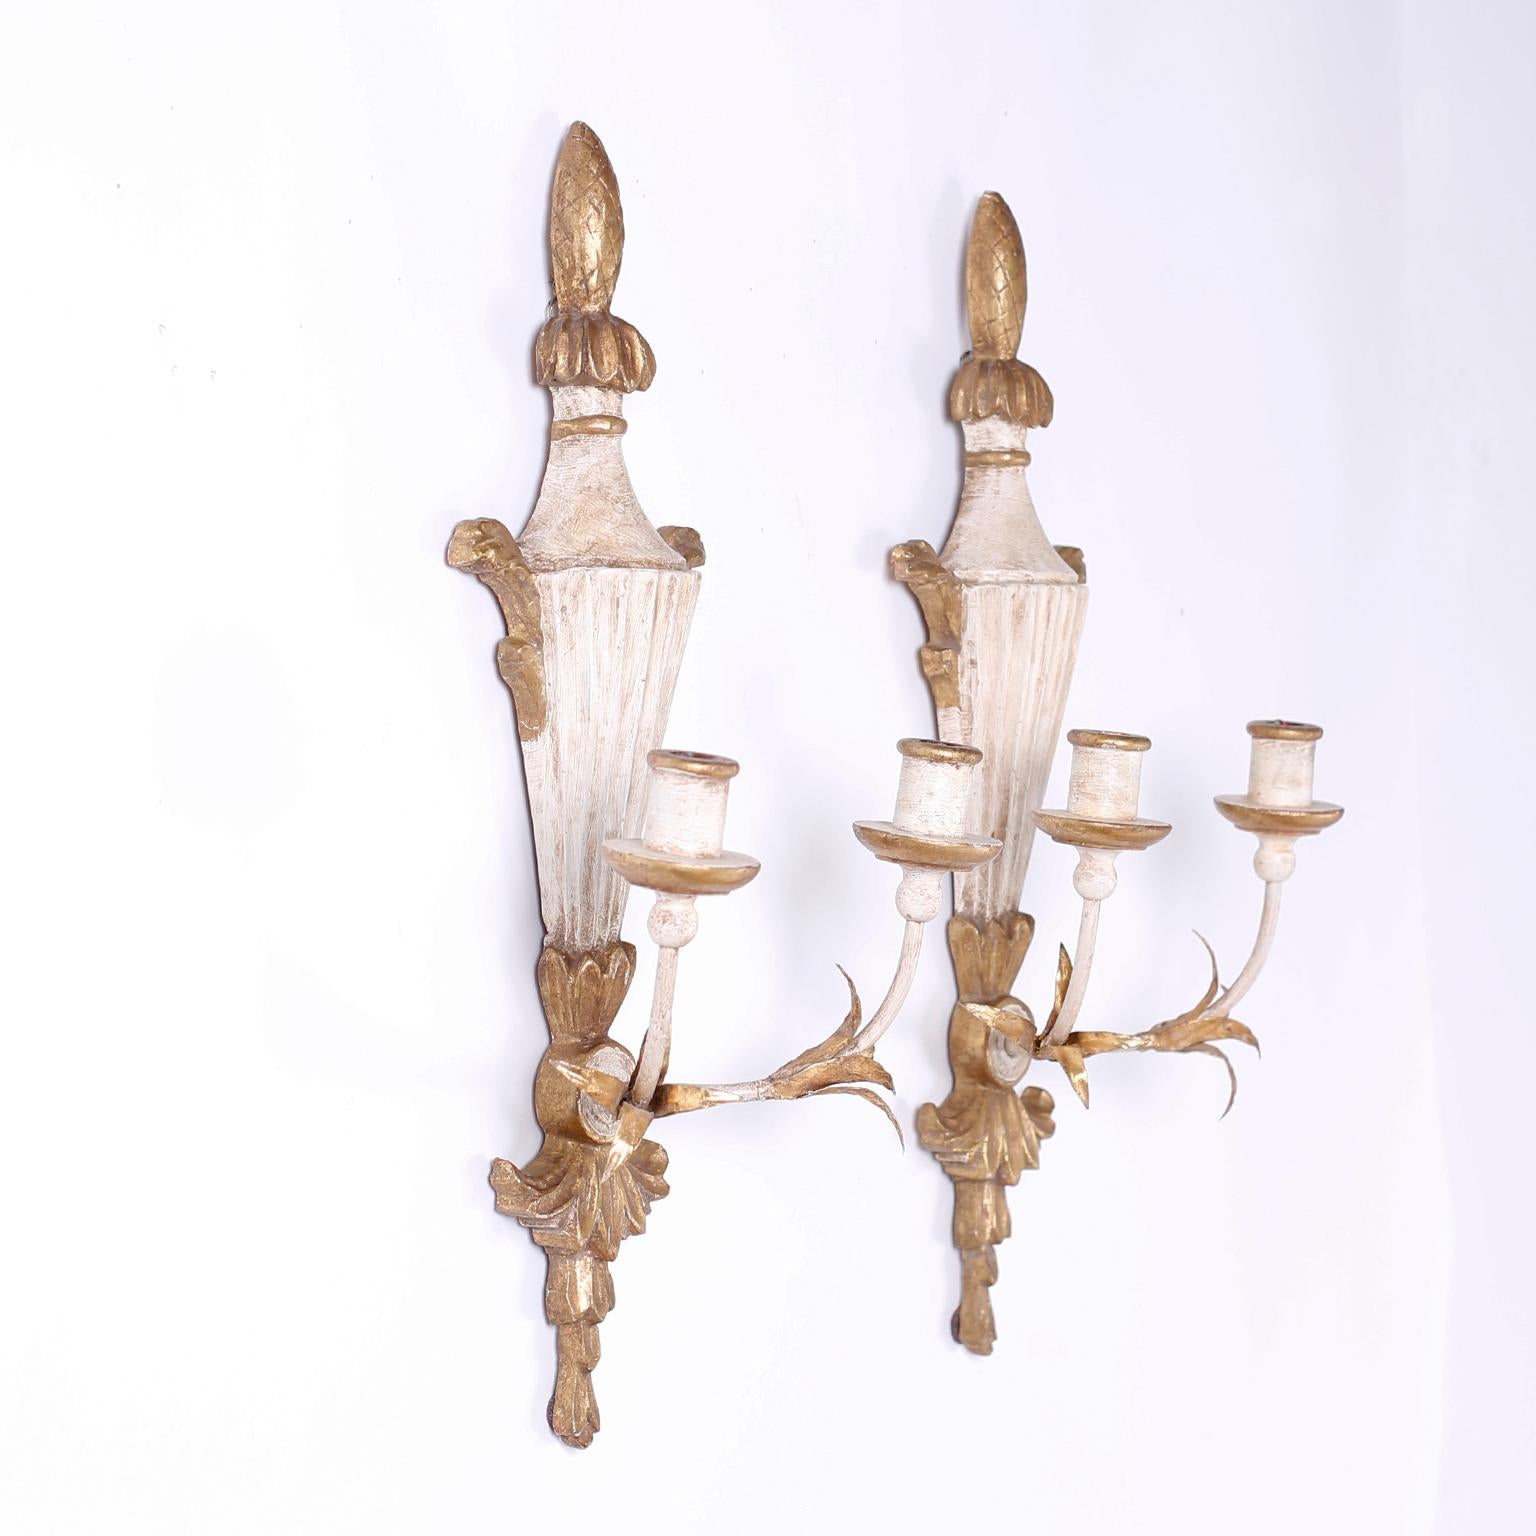 Pair of antique two-light carved wood Italian wall sconces with classical form, distressed white paint, metal arms, and gilt highlights.